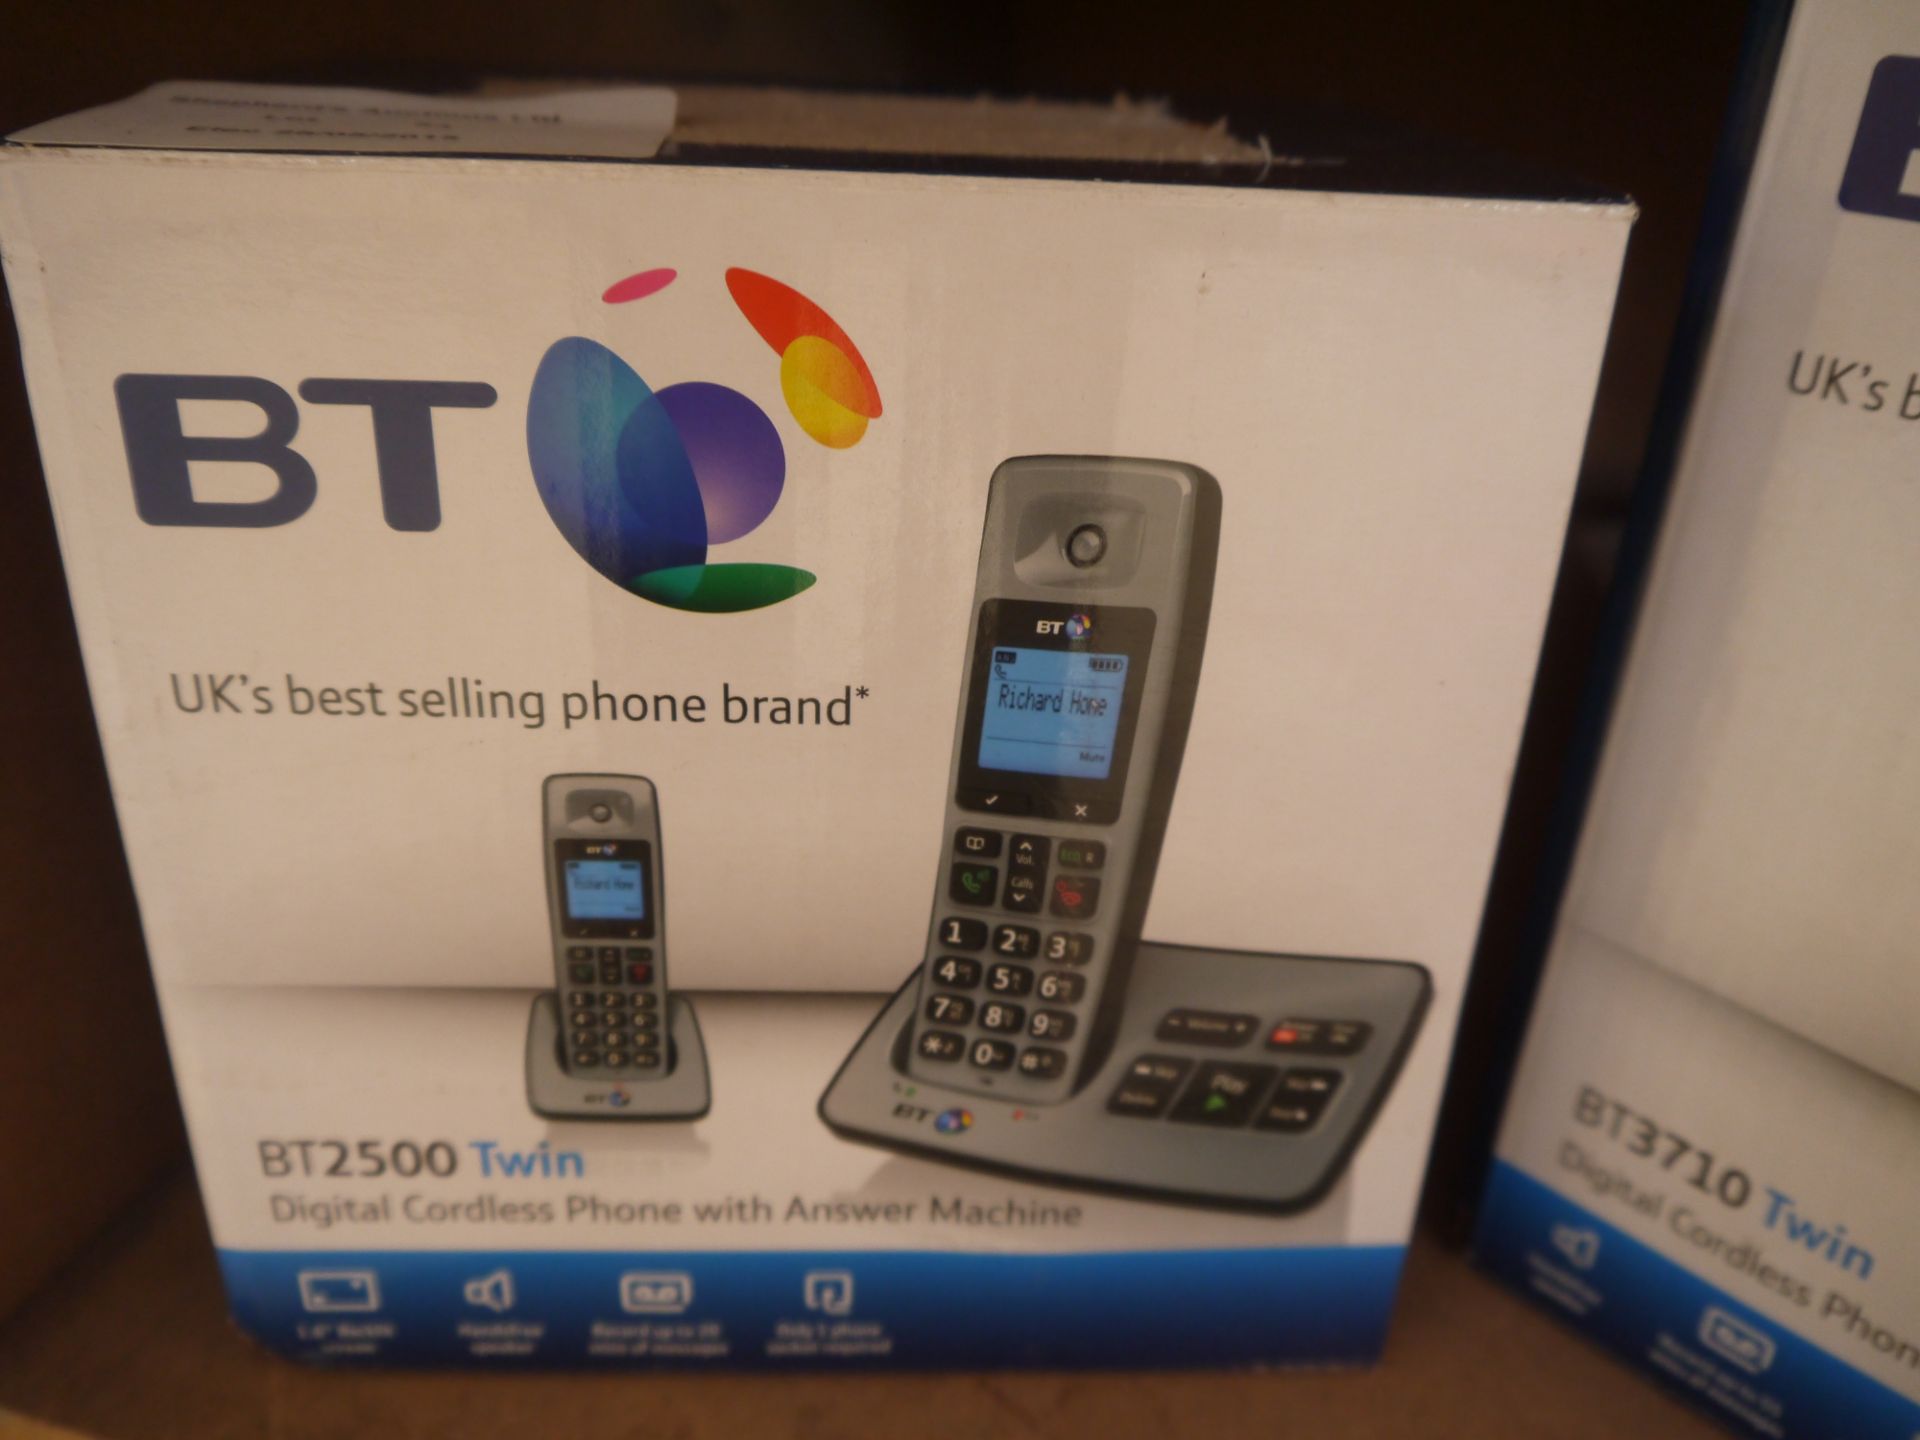 BT 2500 Twin cordless digital phones with answer machine, boxed and with nuisance call blocker